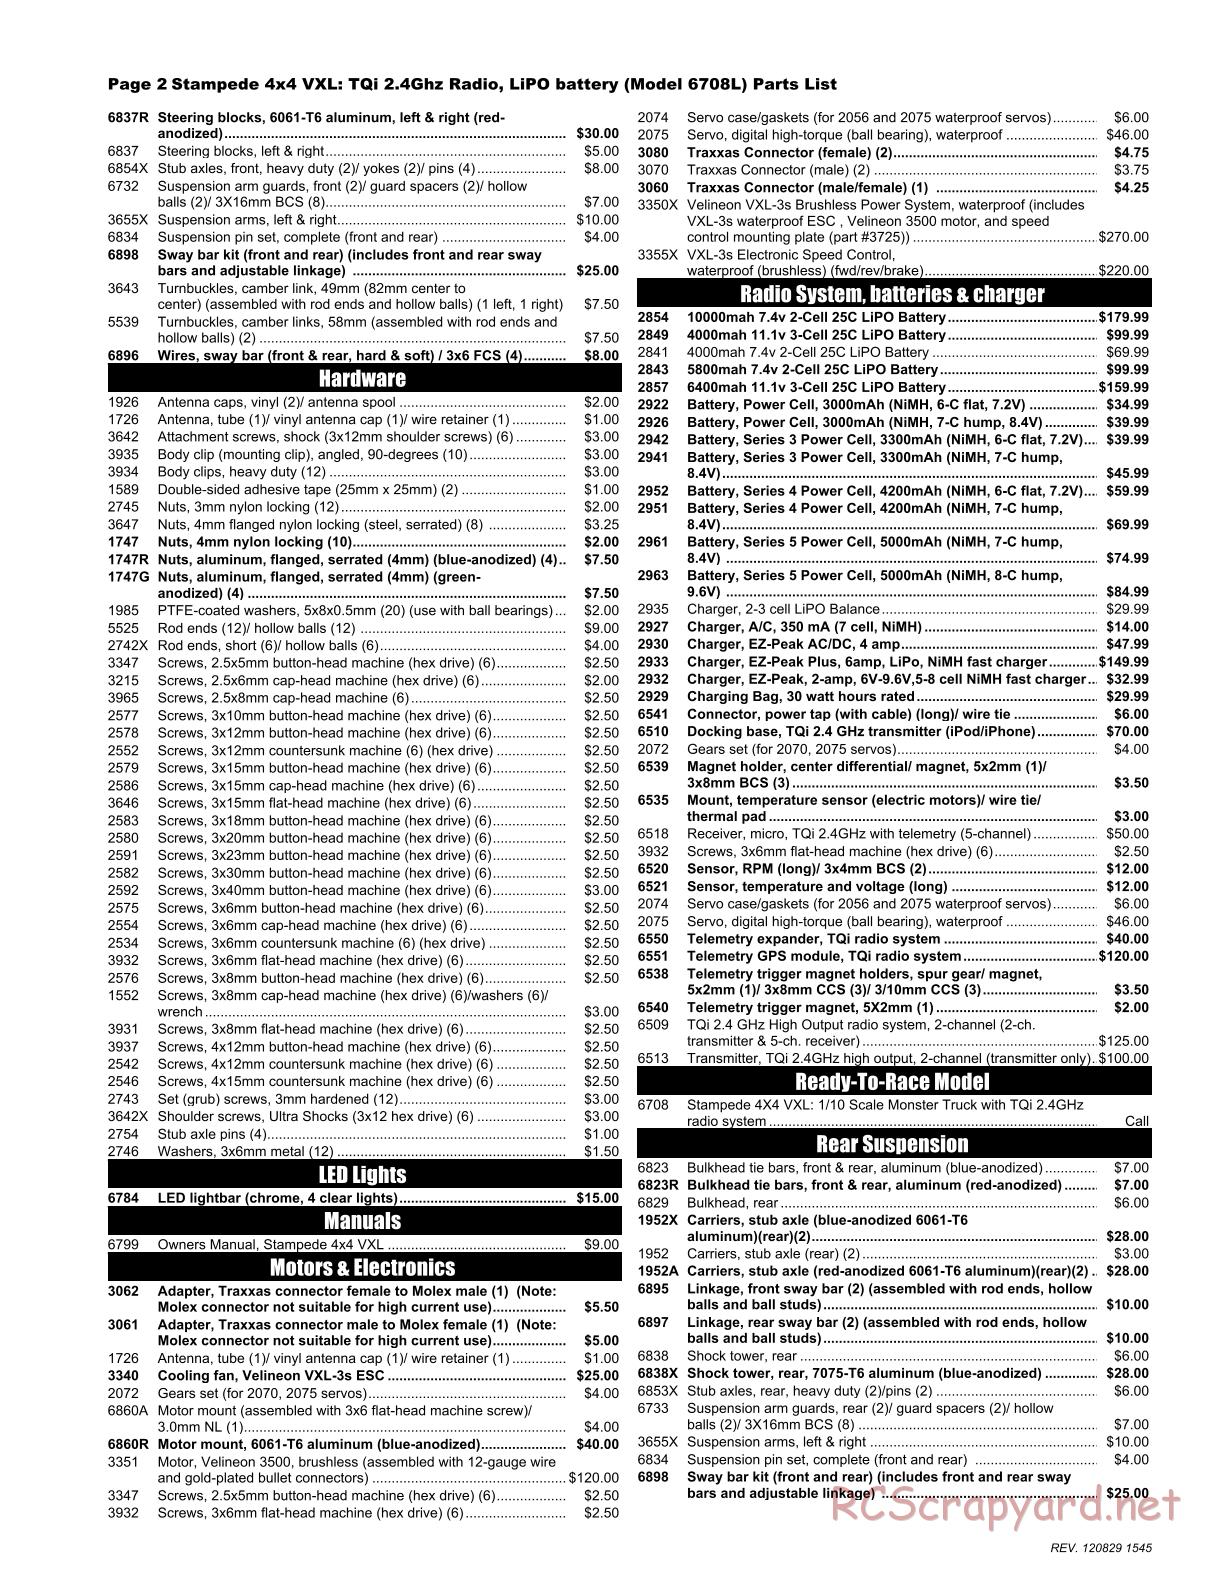 Traxxas - Stampede 4x4 VXL (2012) - Parts List - Page 2